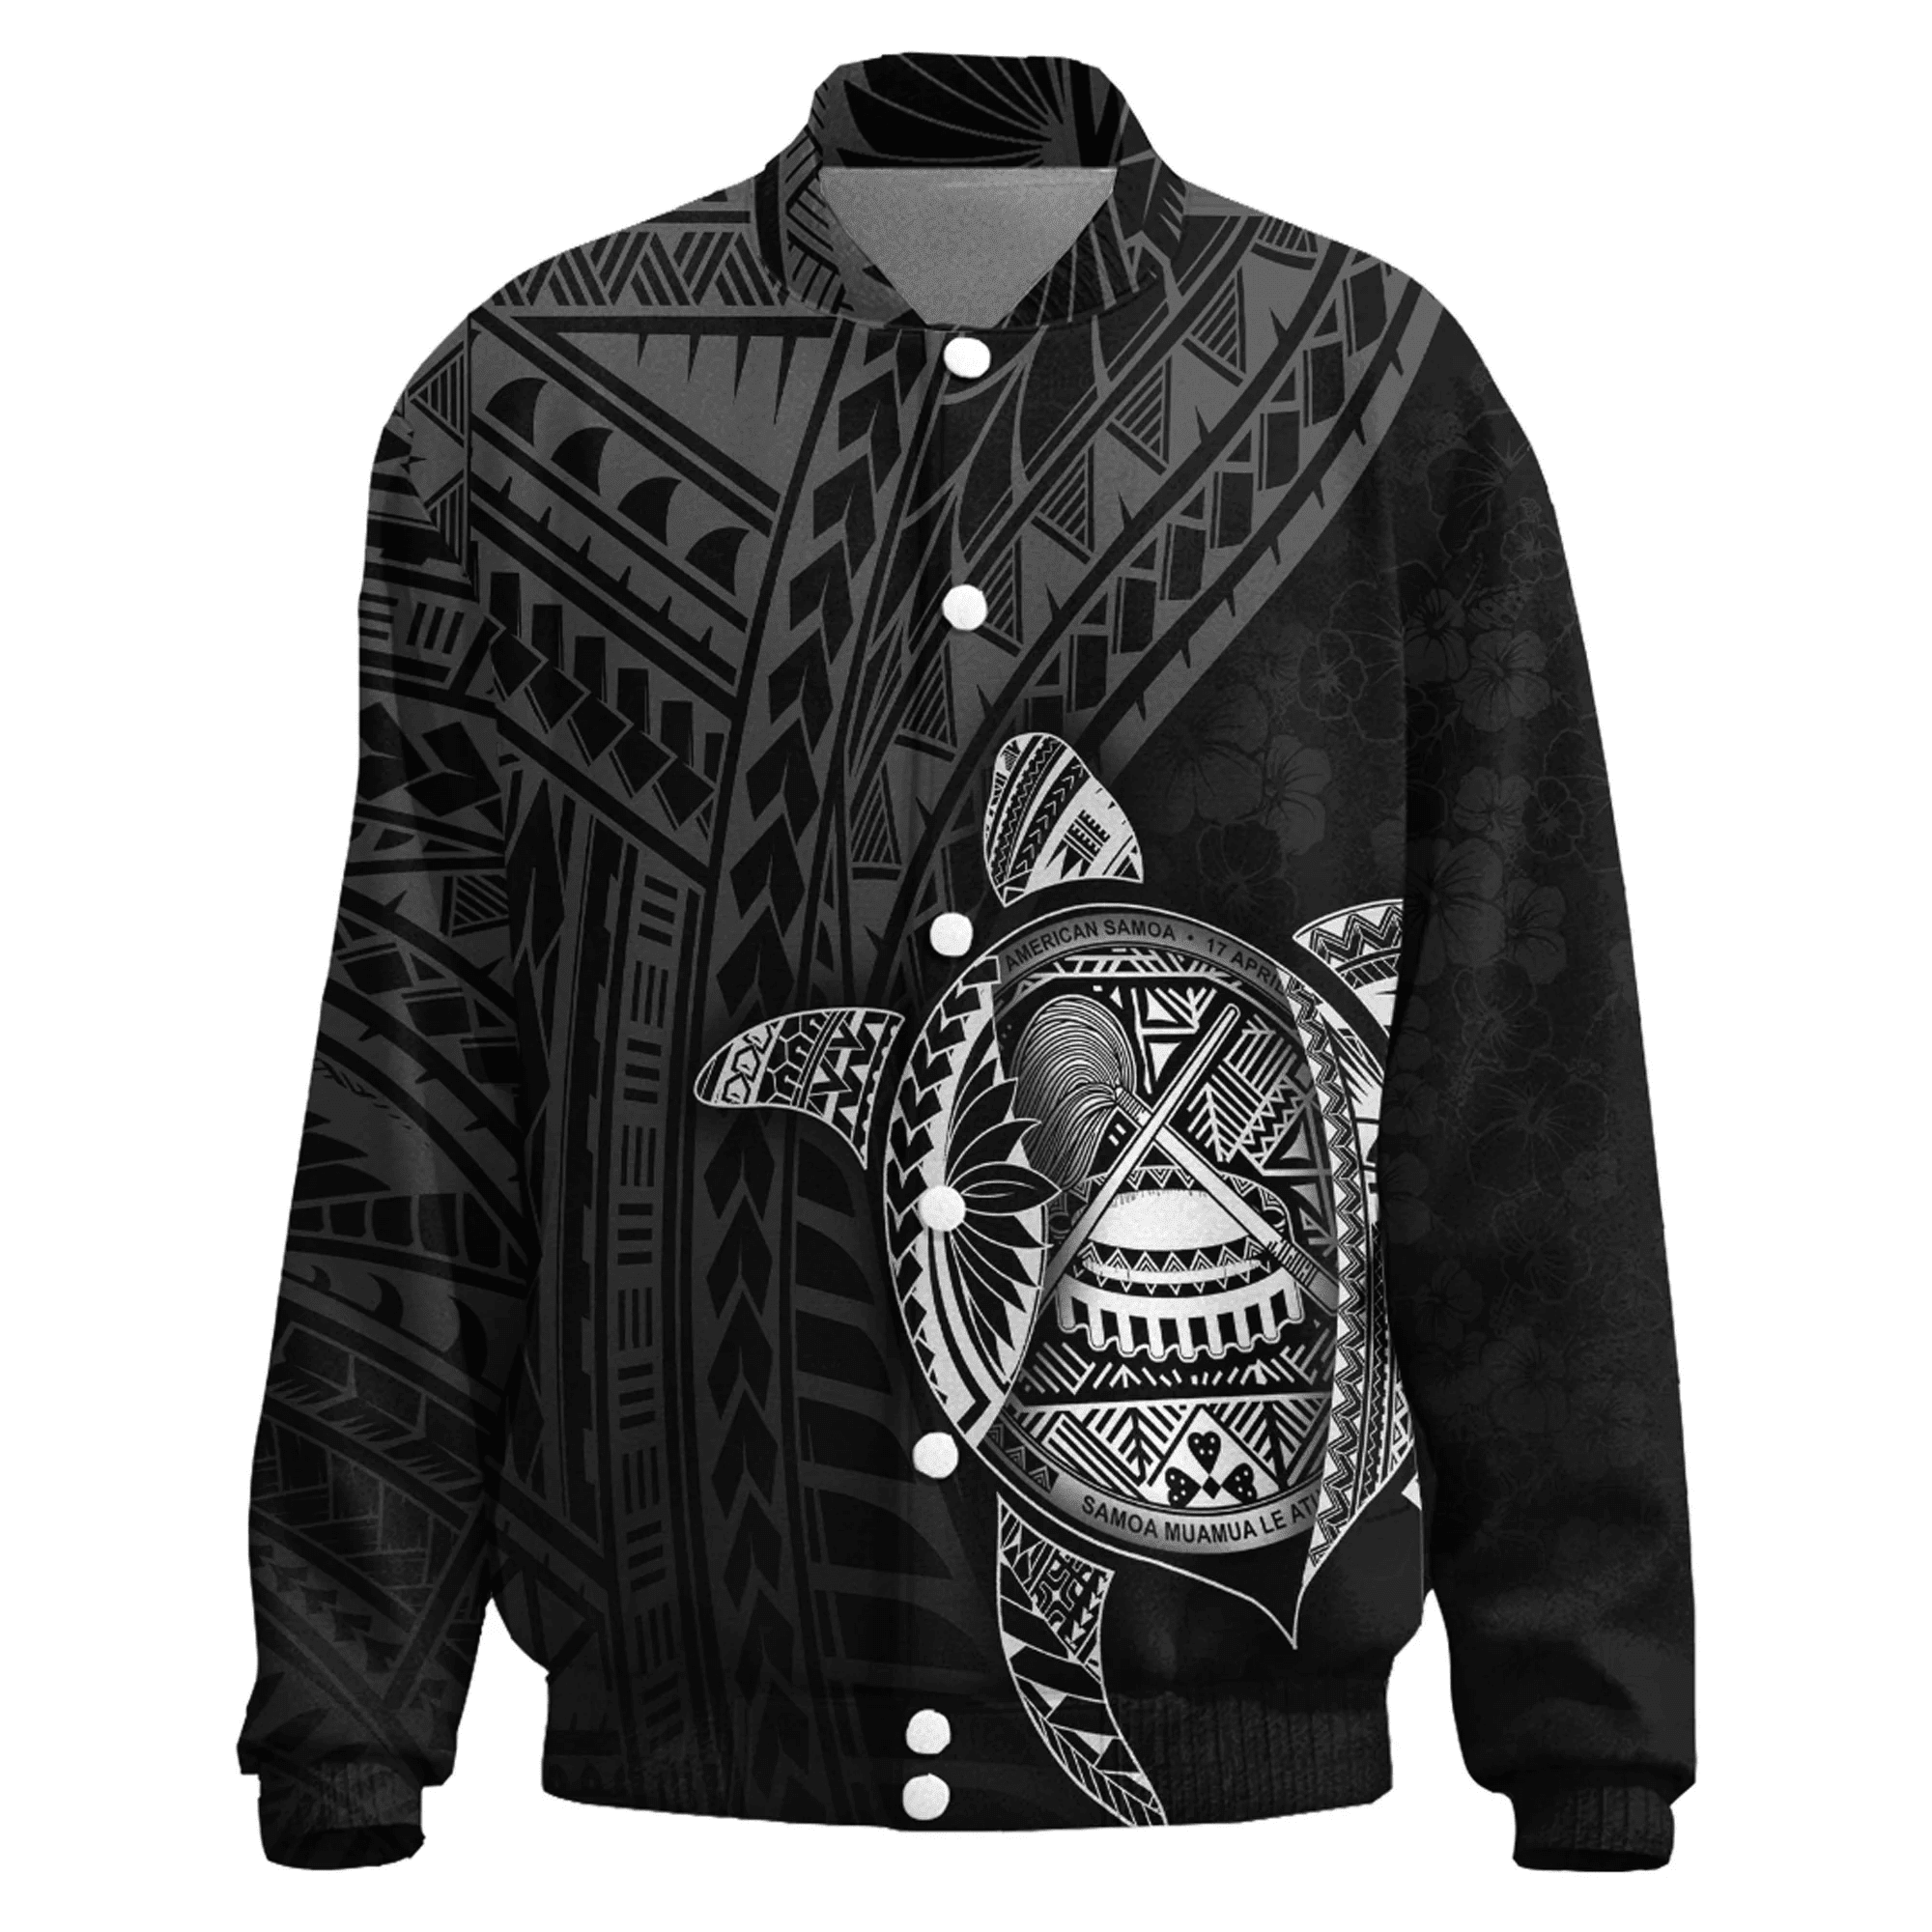 Love New Zealand Clothing - American Samoa Polynesia Turtle Coat Of Arms Thicken Stand-Collar Jacket A95 | Love New Zealand